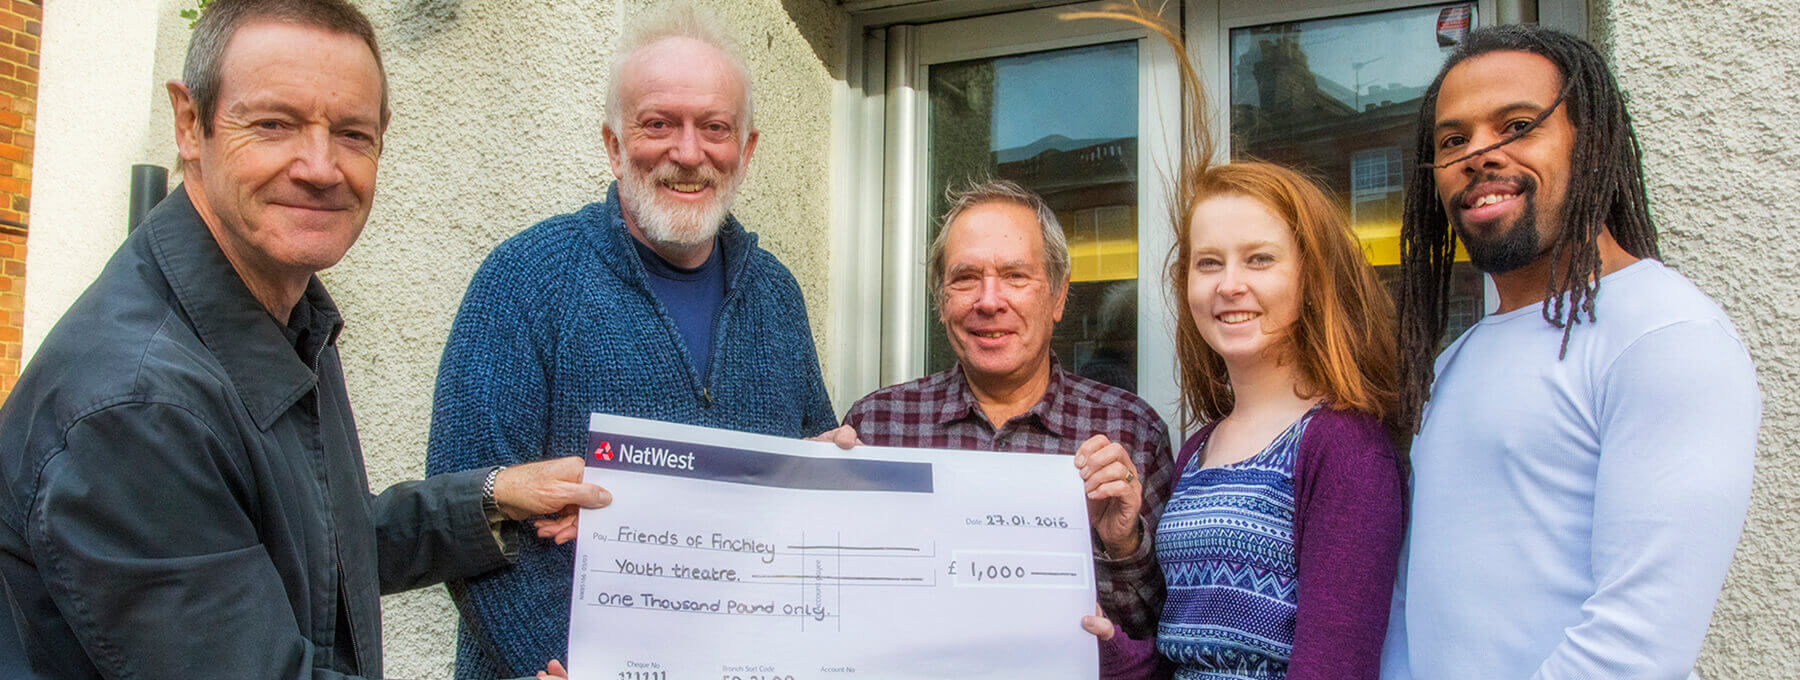 Peter Hale (left) handing over the EFOA donation to the East Finchley Youth Theatre